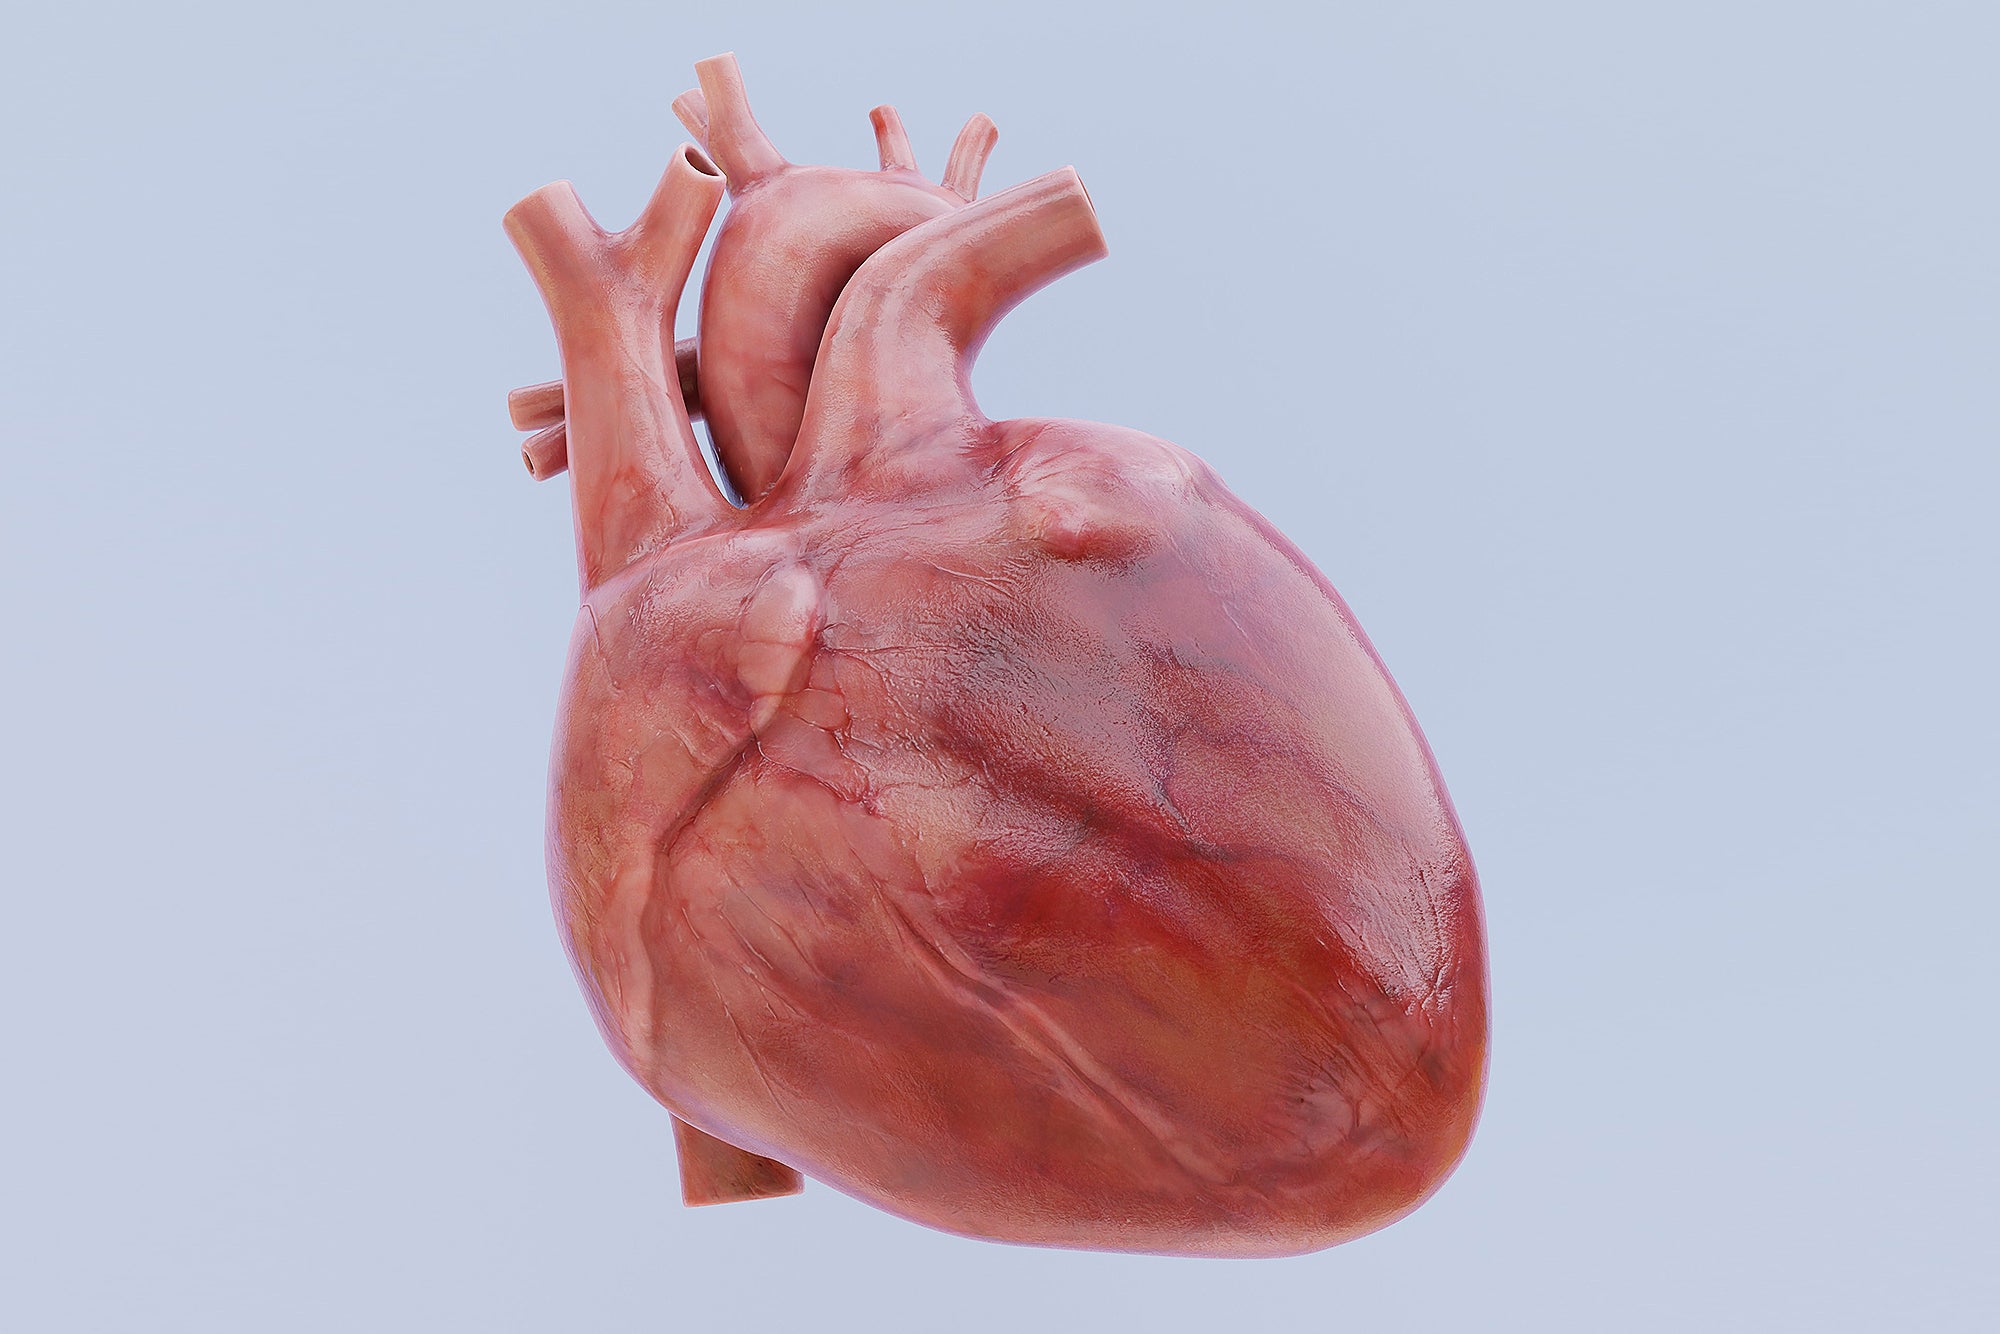 First-Ever Biorobotic Heart Helps Scientists Study Cardiac Function